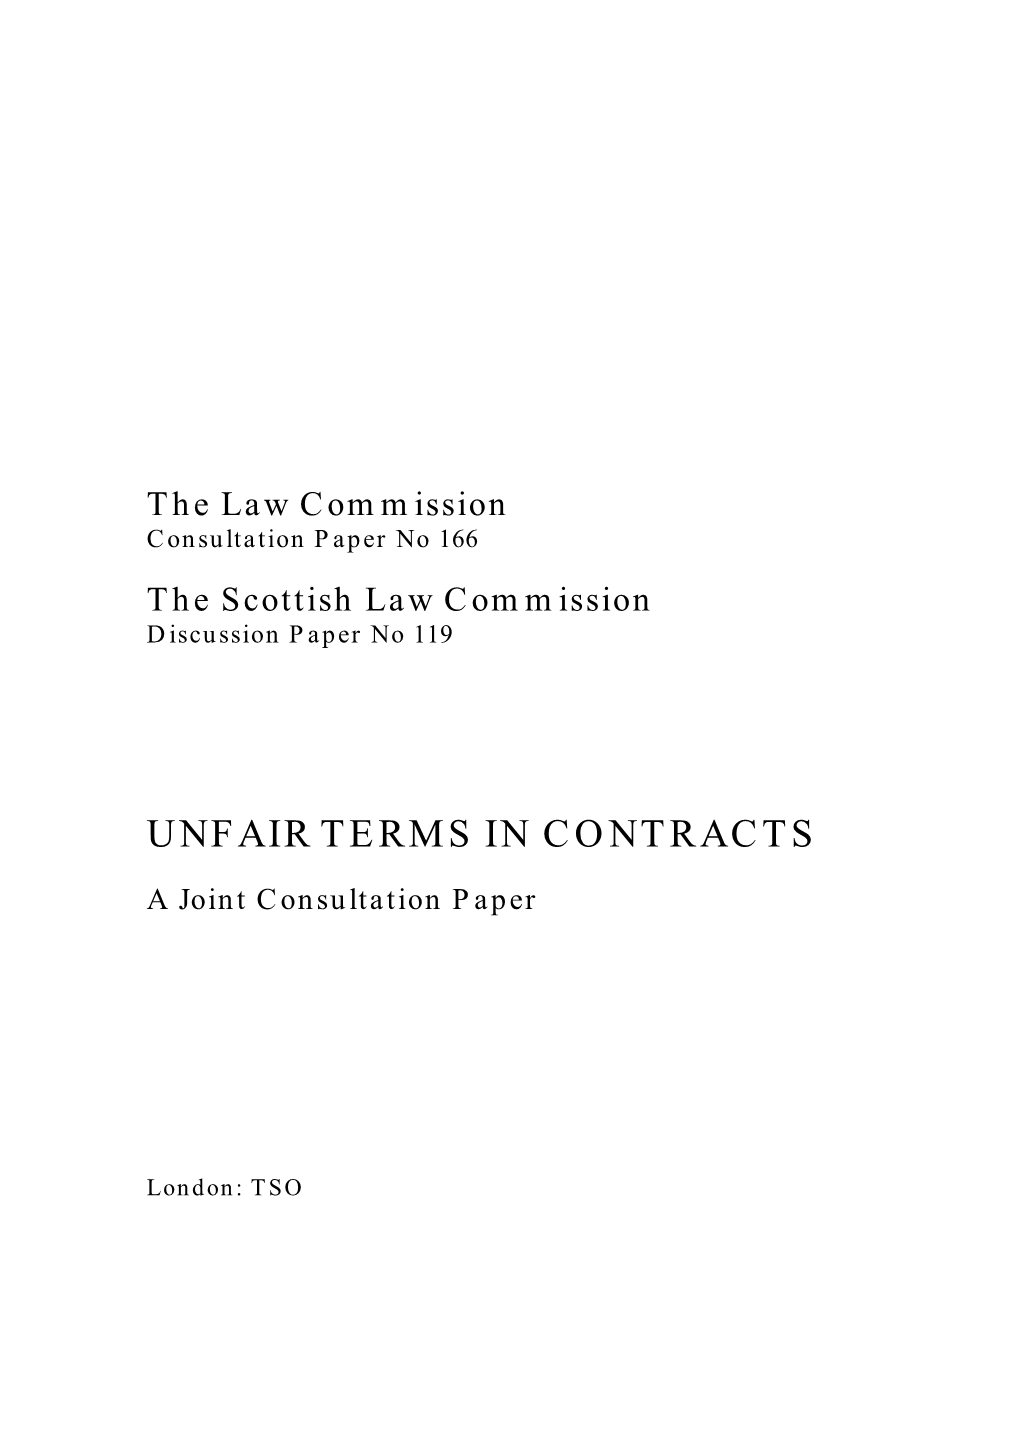 Unfair Terms in Contracts Consultation